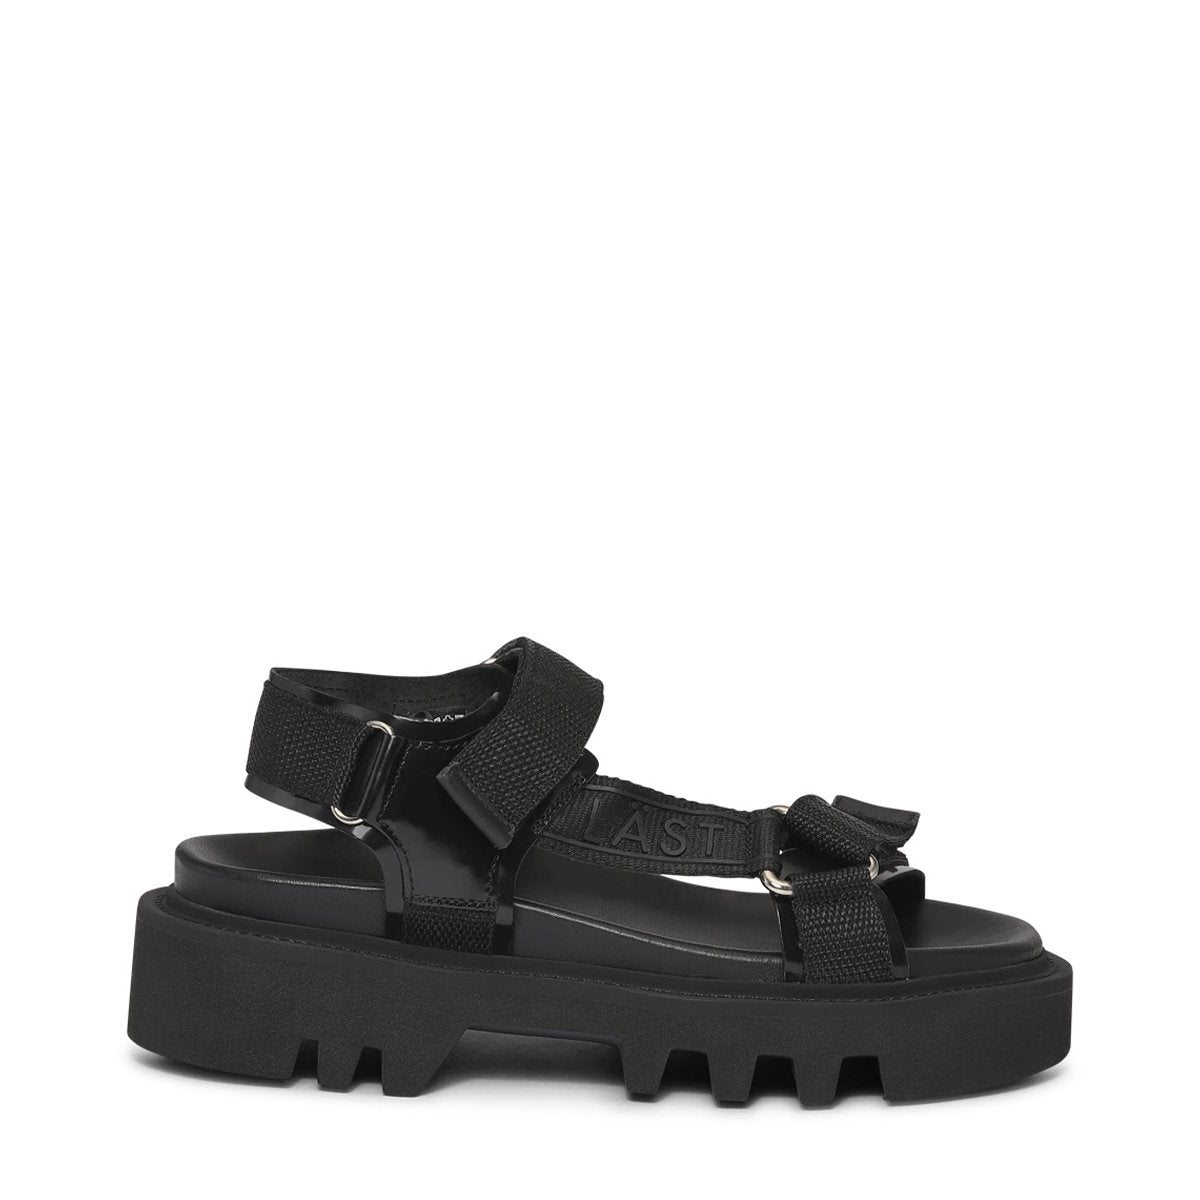 Candy Black Chunky Sandals LAST1038 - 1